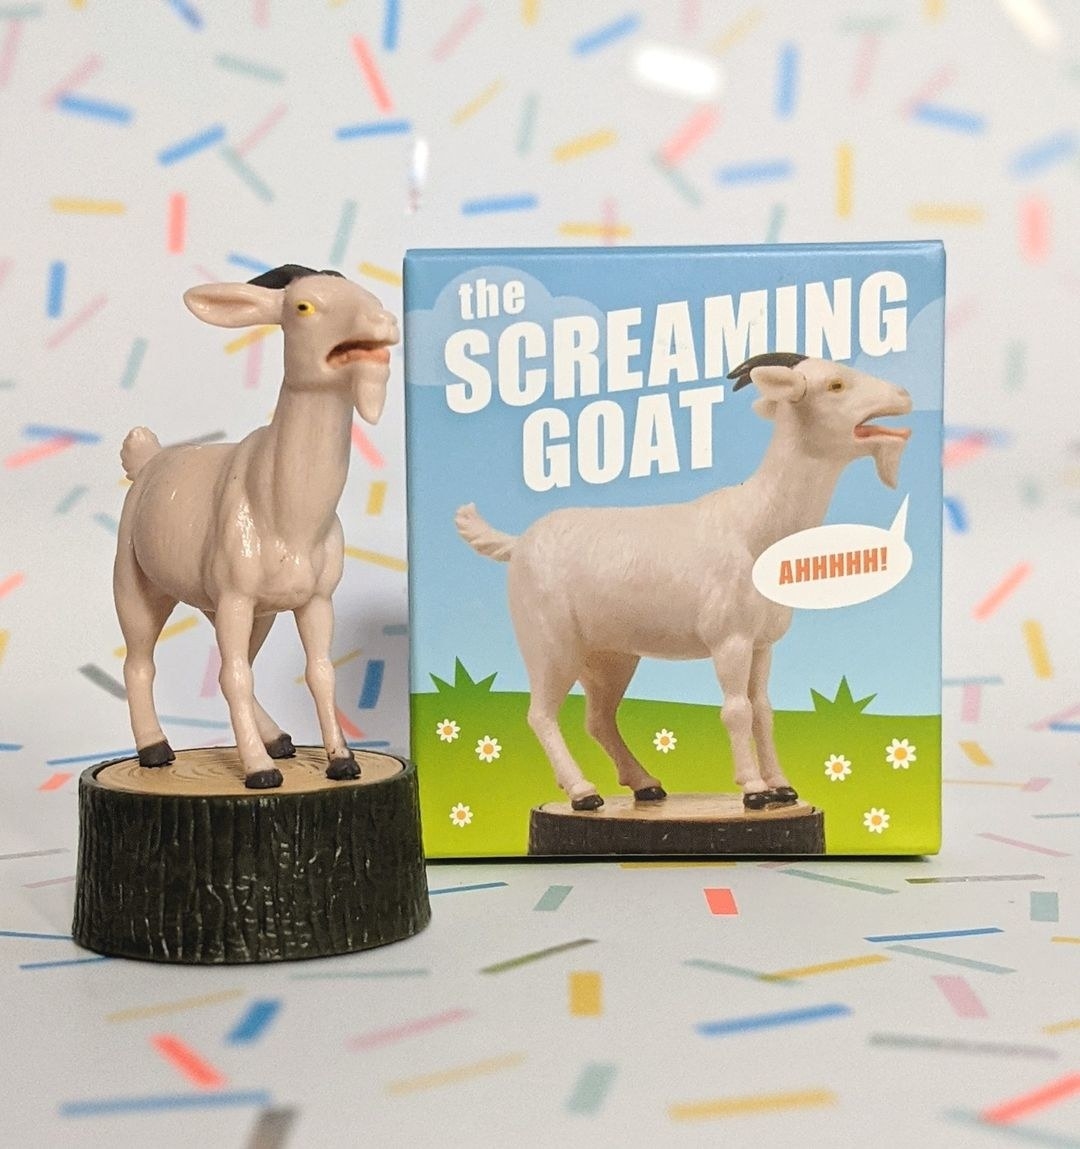 The goat figurine next to its box